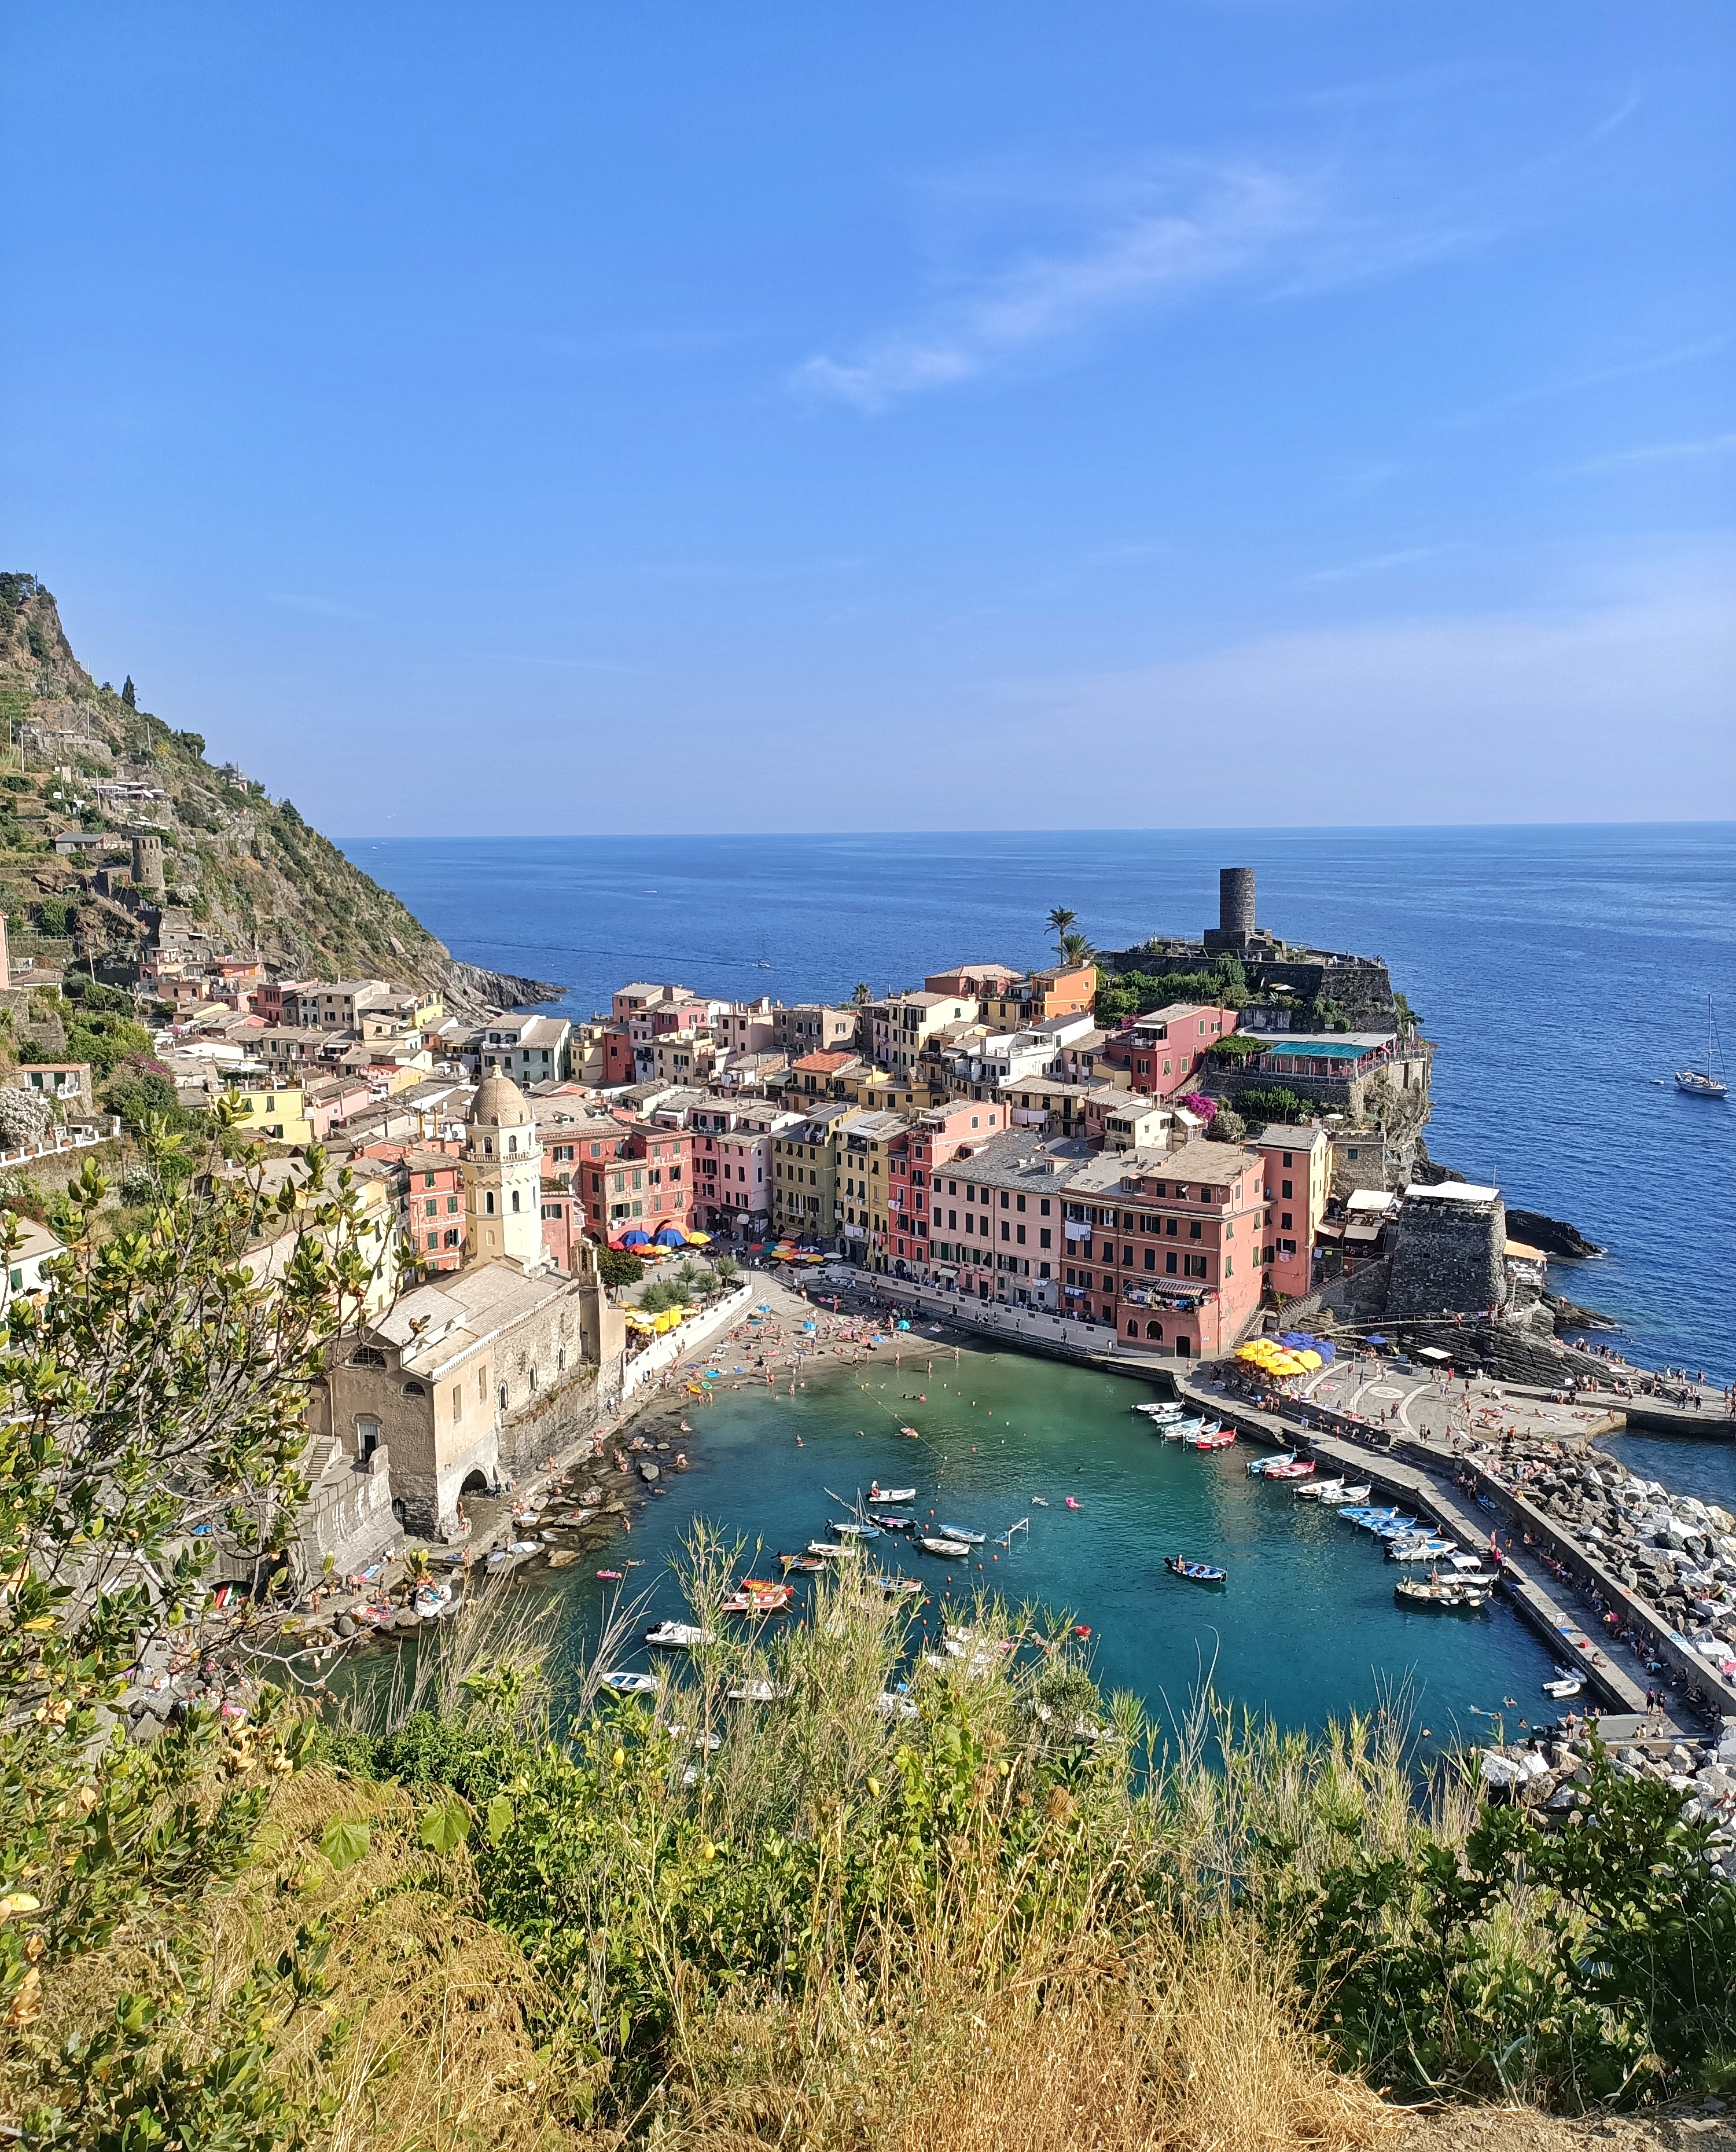 A panoramic view of Vernazza, a village of the Cinque Terre in Italy. We can see the blue water of the sea, the boats, and the colourful houses of the village.